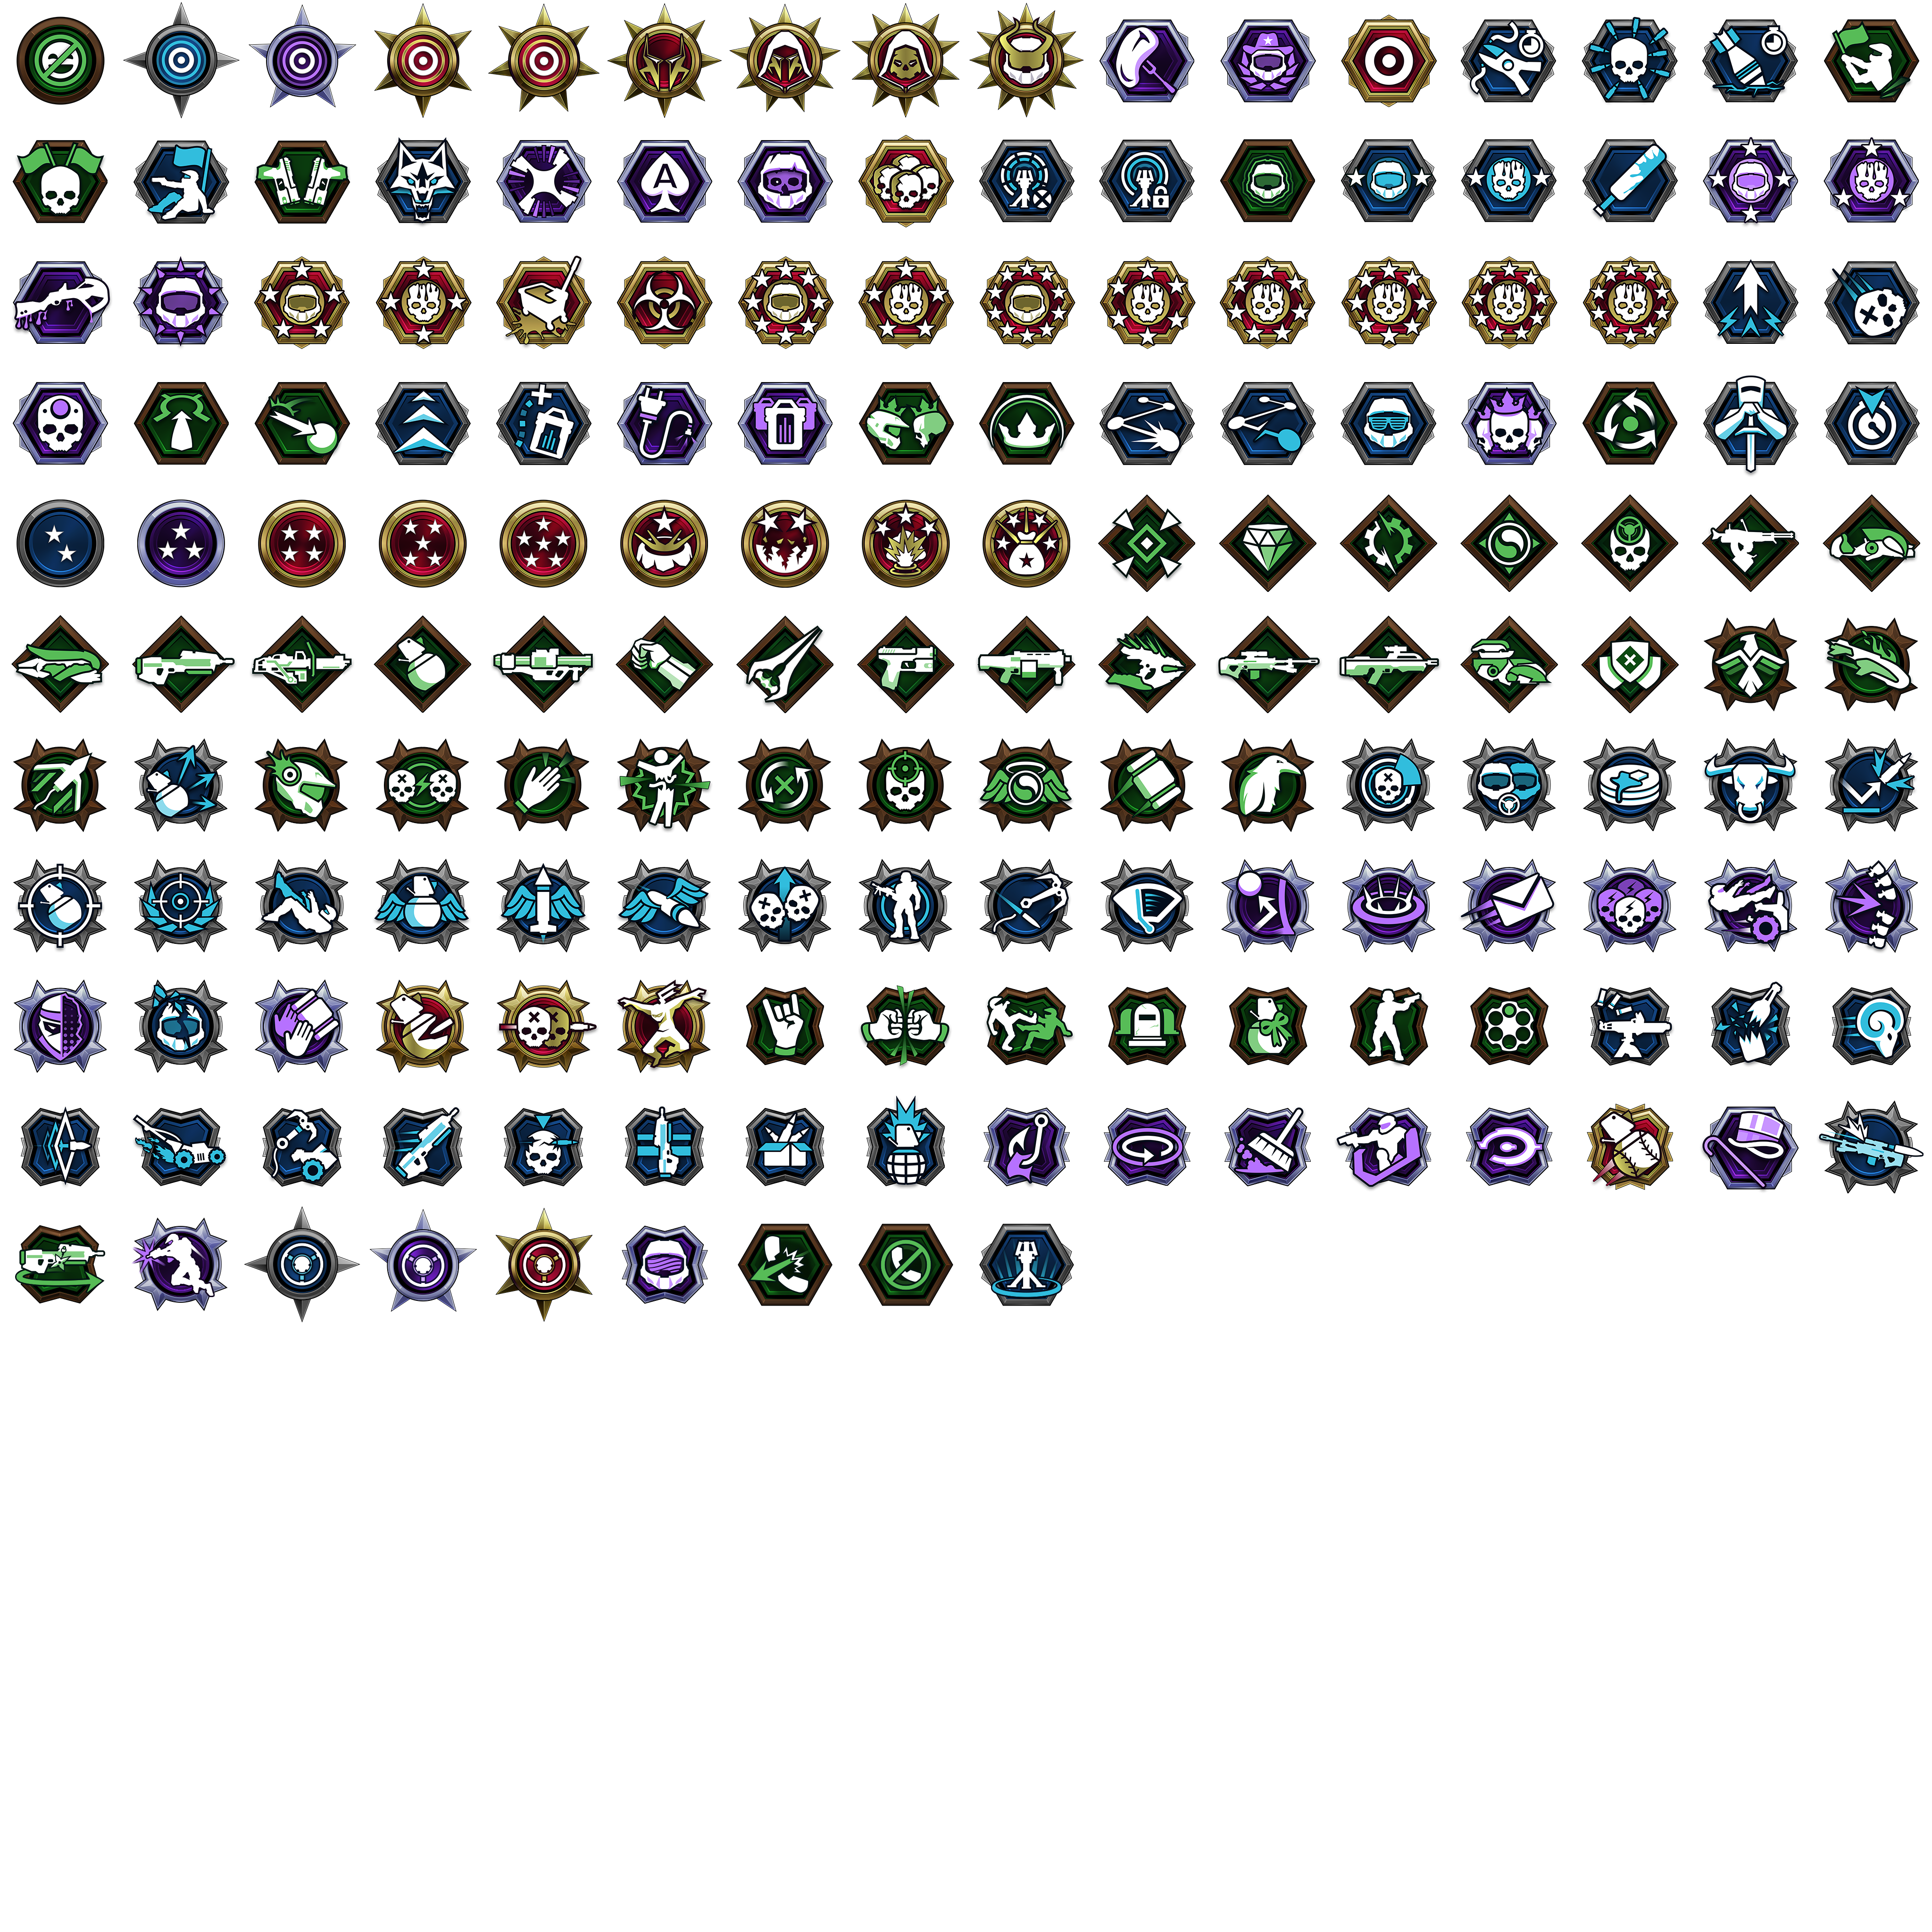 Image of the new medal sprite sheet